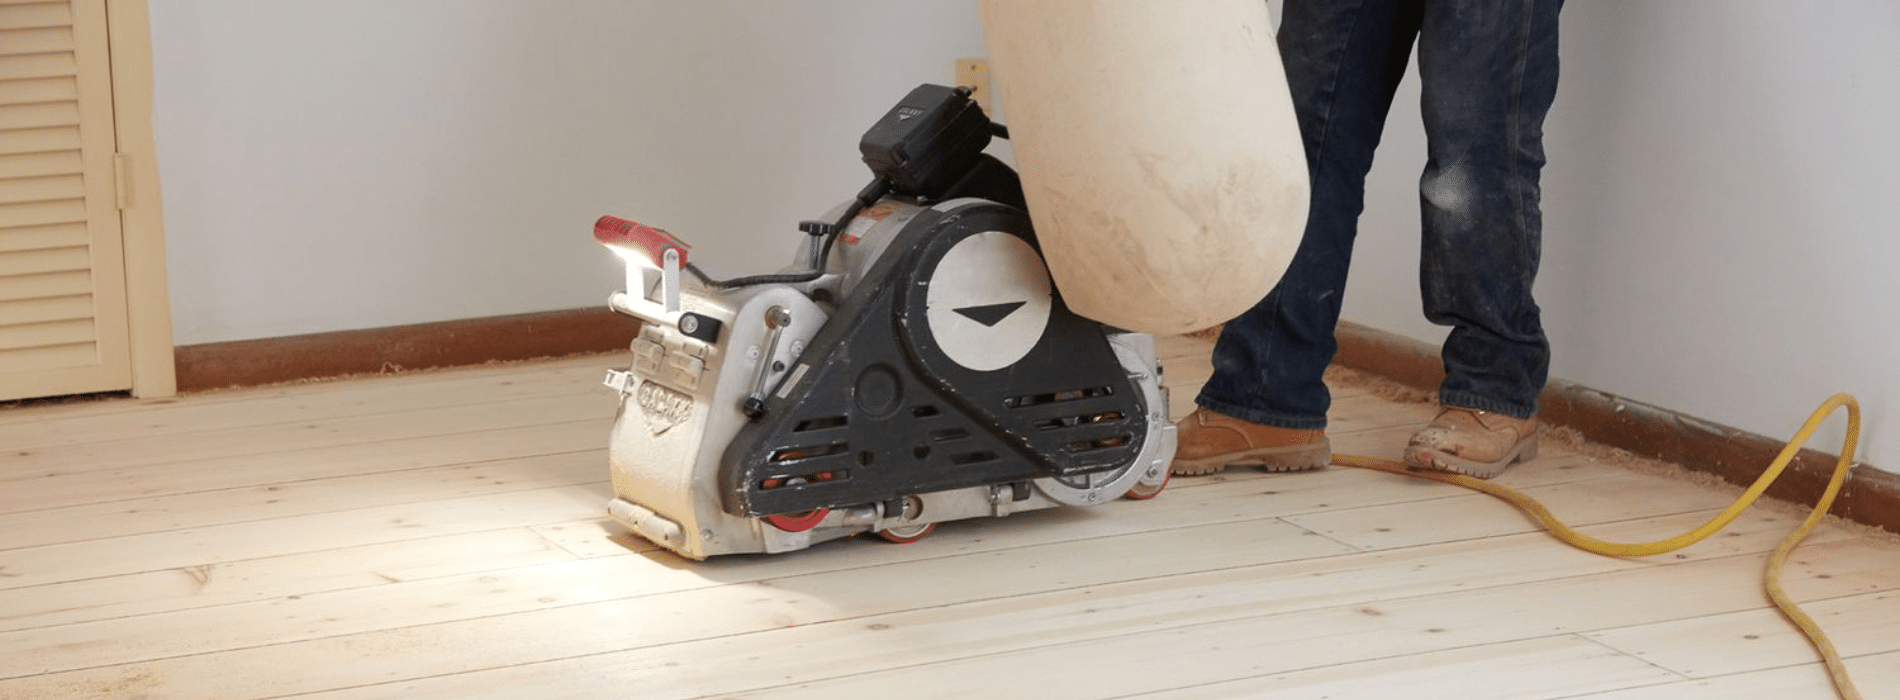 Mr Sander® showcase their expertise in sanding a herringbone floor using a Bona Scorpion drum sander in Greater London (North). This 200 mm powerhouse, with a 1.5 kW effect, operates at 240 V and 50 Hz. The process includes a dust extraction system with a HEPA filter, ensuring a clean and efficient outcome.